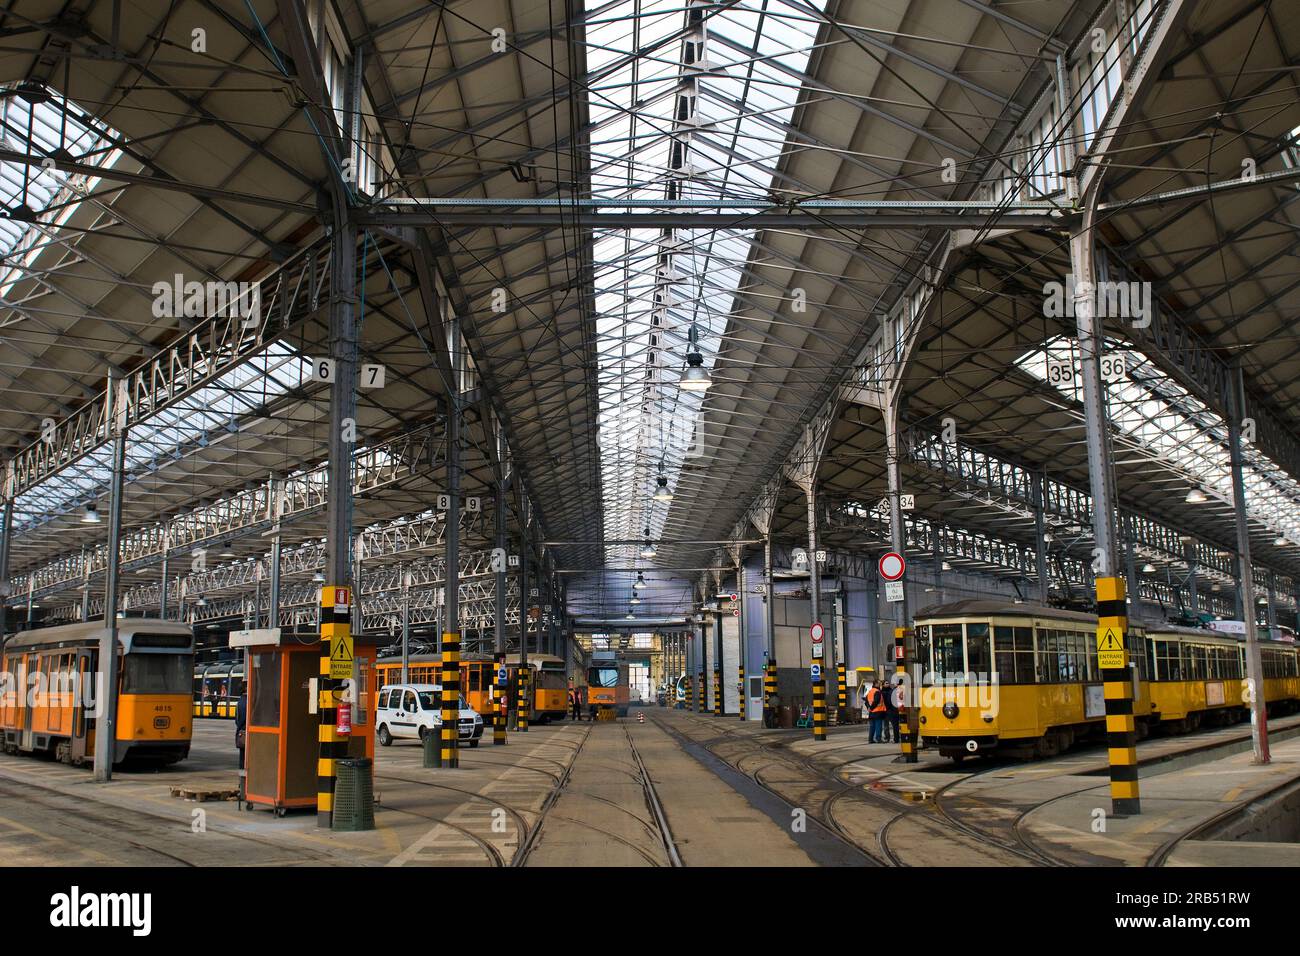 Tram shed ATM. Milan. Italy Stock Photo